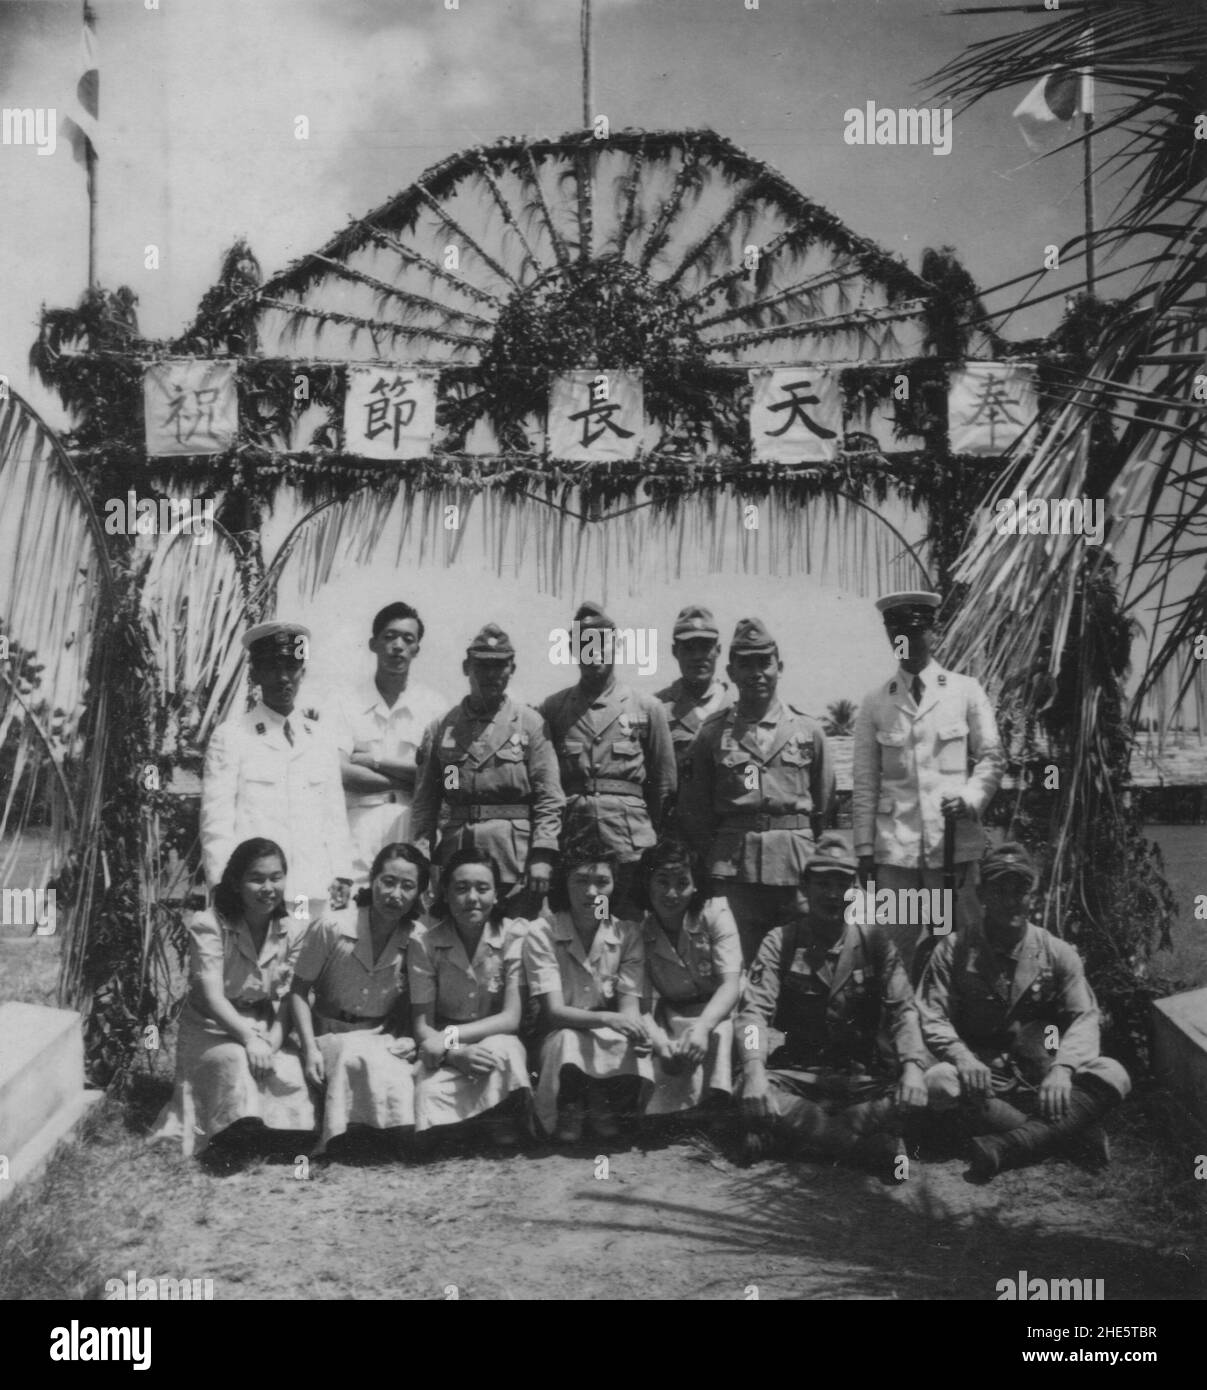 Pacific War, 1941-1945. Sailors and civil officers of the Imperial Japanese Navy and Indonesian locals gather to celebrate the birthday of Emperor Hirohito in Japanese-occupied Celebes, Dutch East Indies, April 29th, circa 1942. Stock Photo